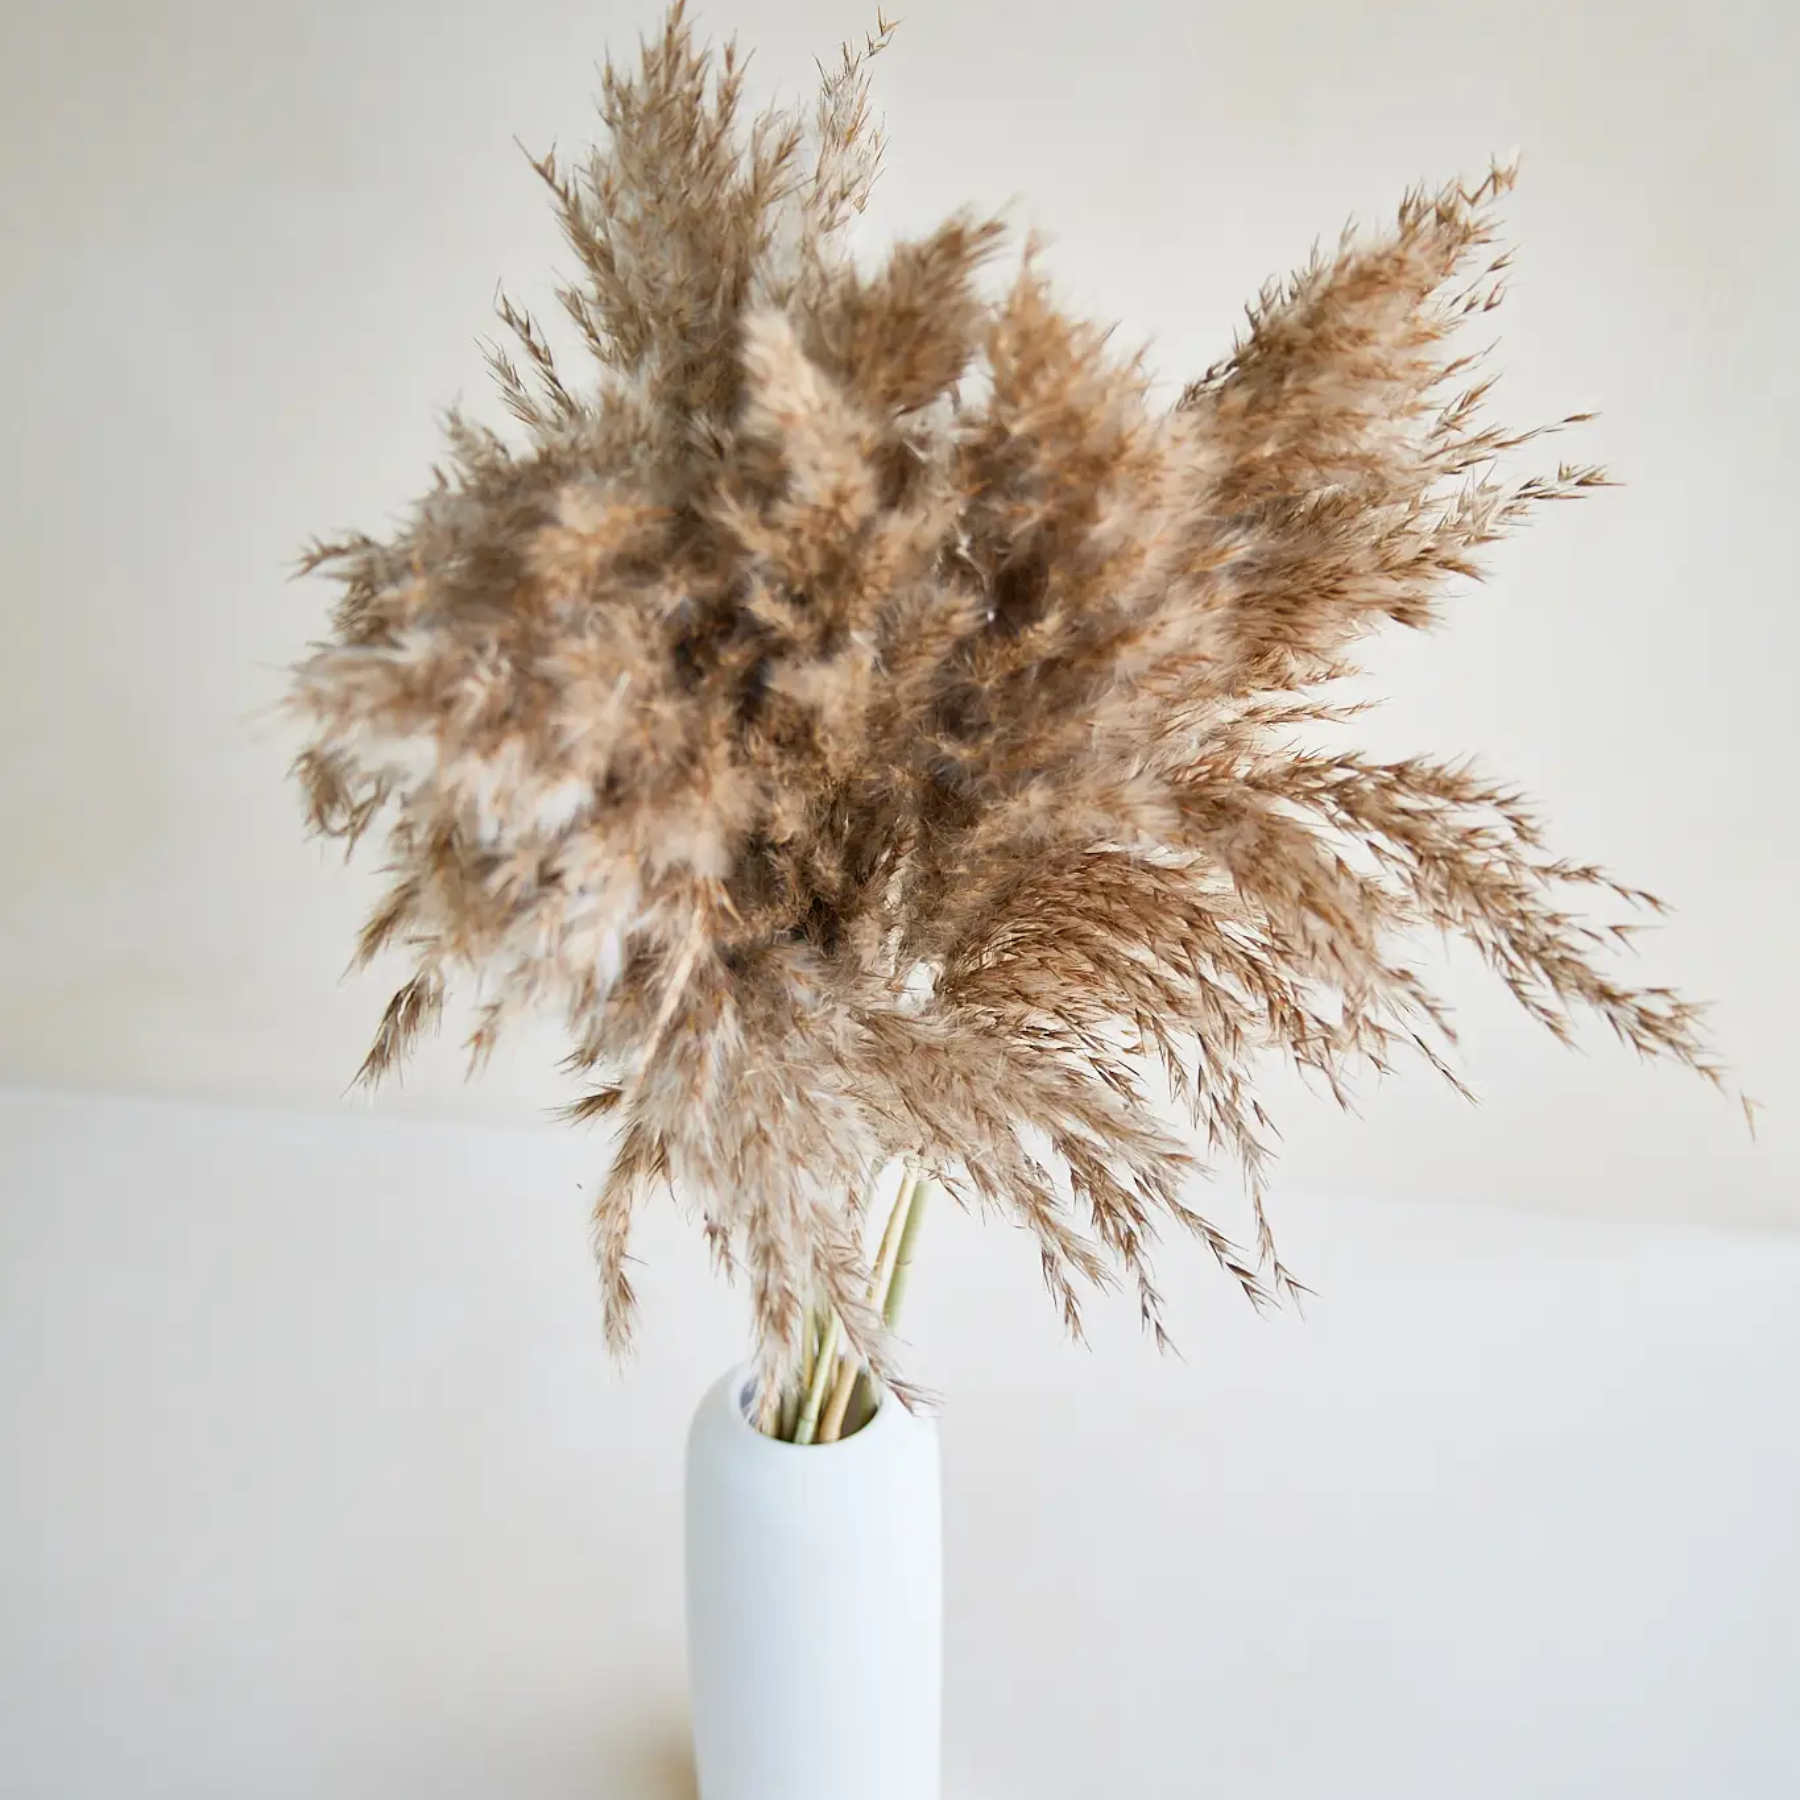 Pampas Grass in Brown